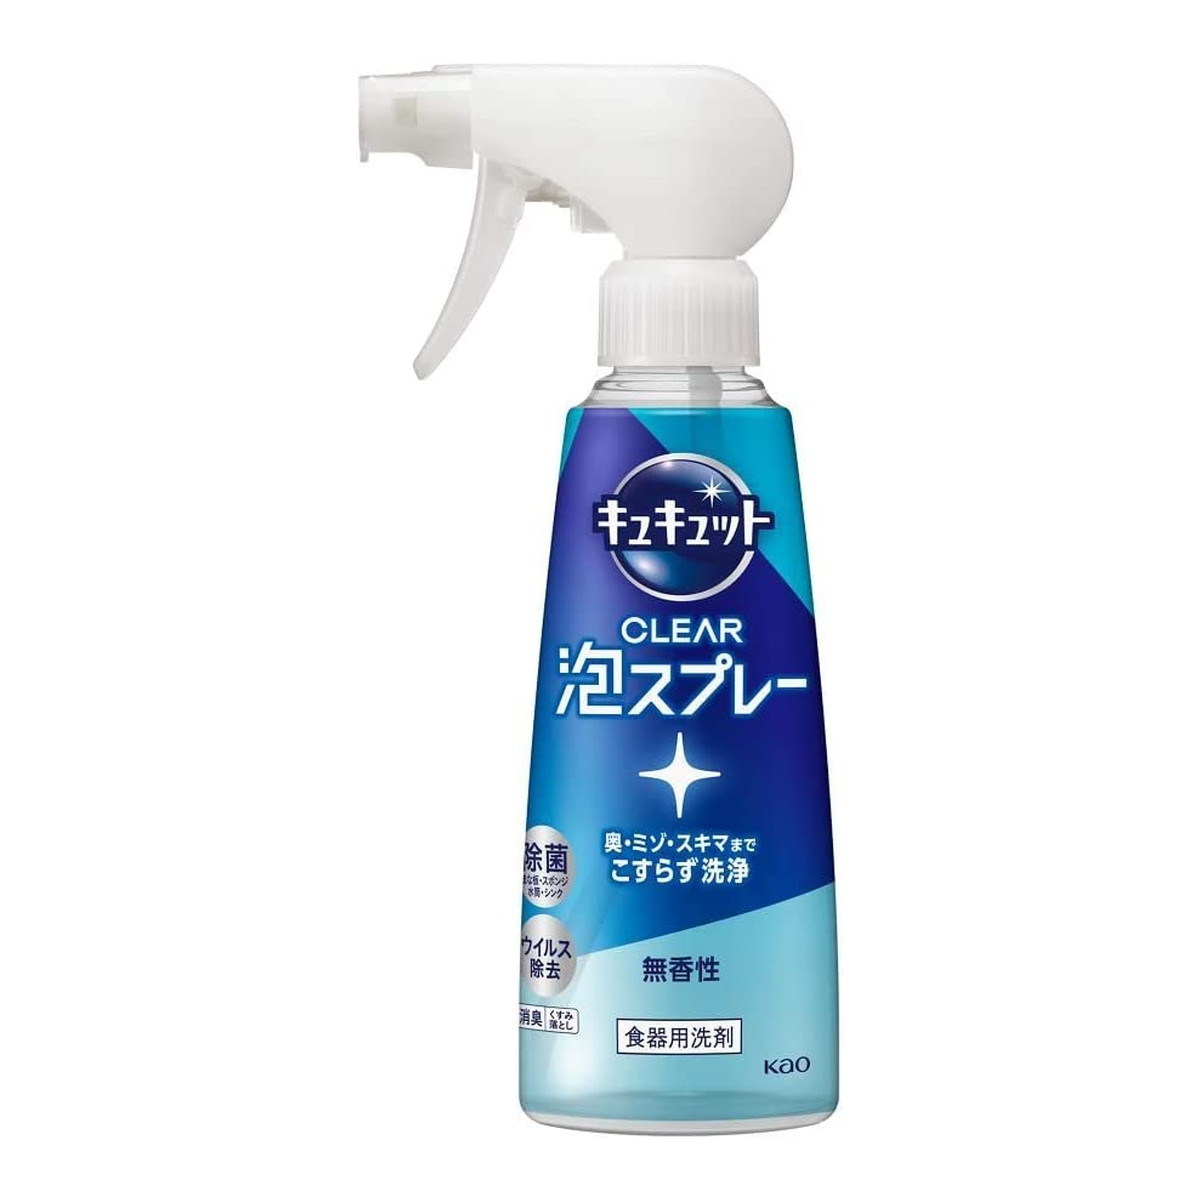 Kao キュキュット CLEAR 泡スプレー 無香性 本体 280ml ×3 キュキュット 台所用洗剤の商品画像